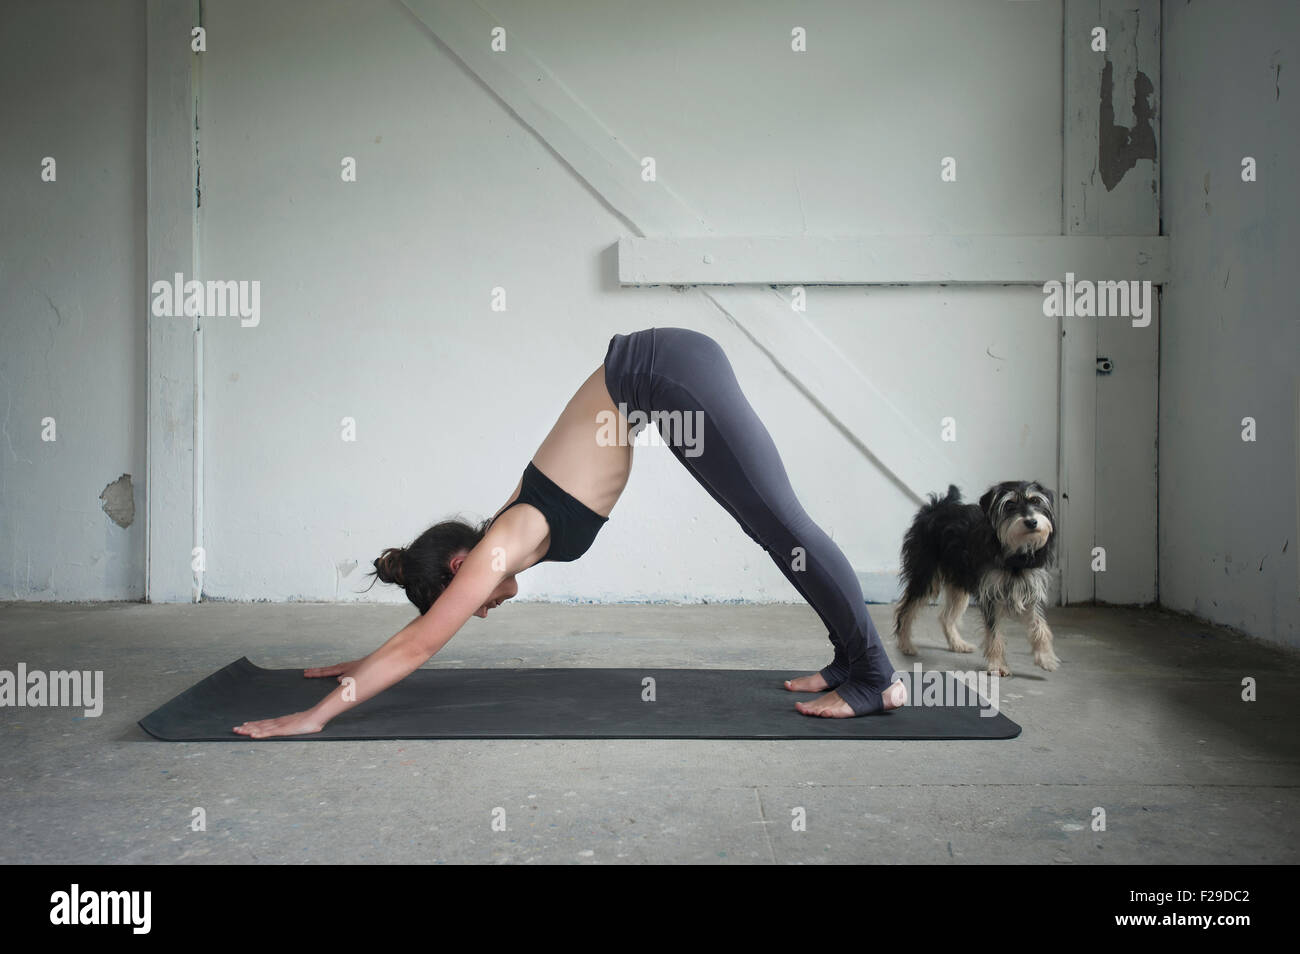 Mid adult woman practicing downward facing dog pose in yoga studio, Munich, Bavaria, Germany Stock Photo